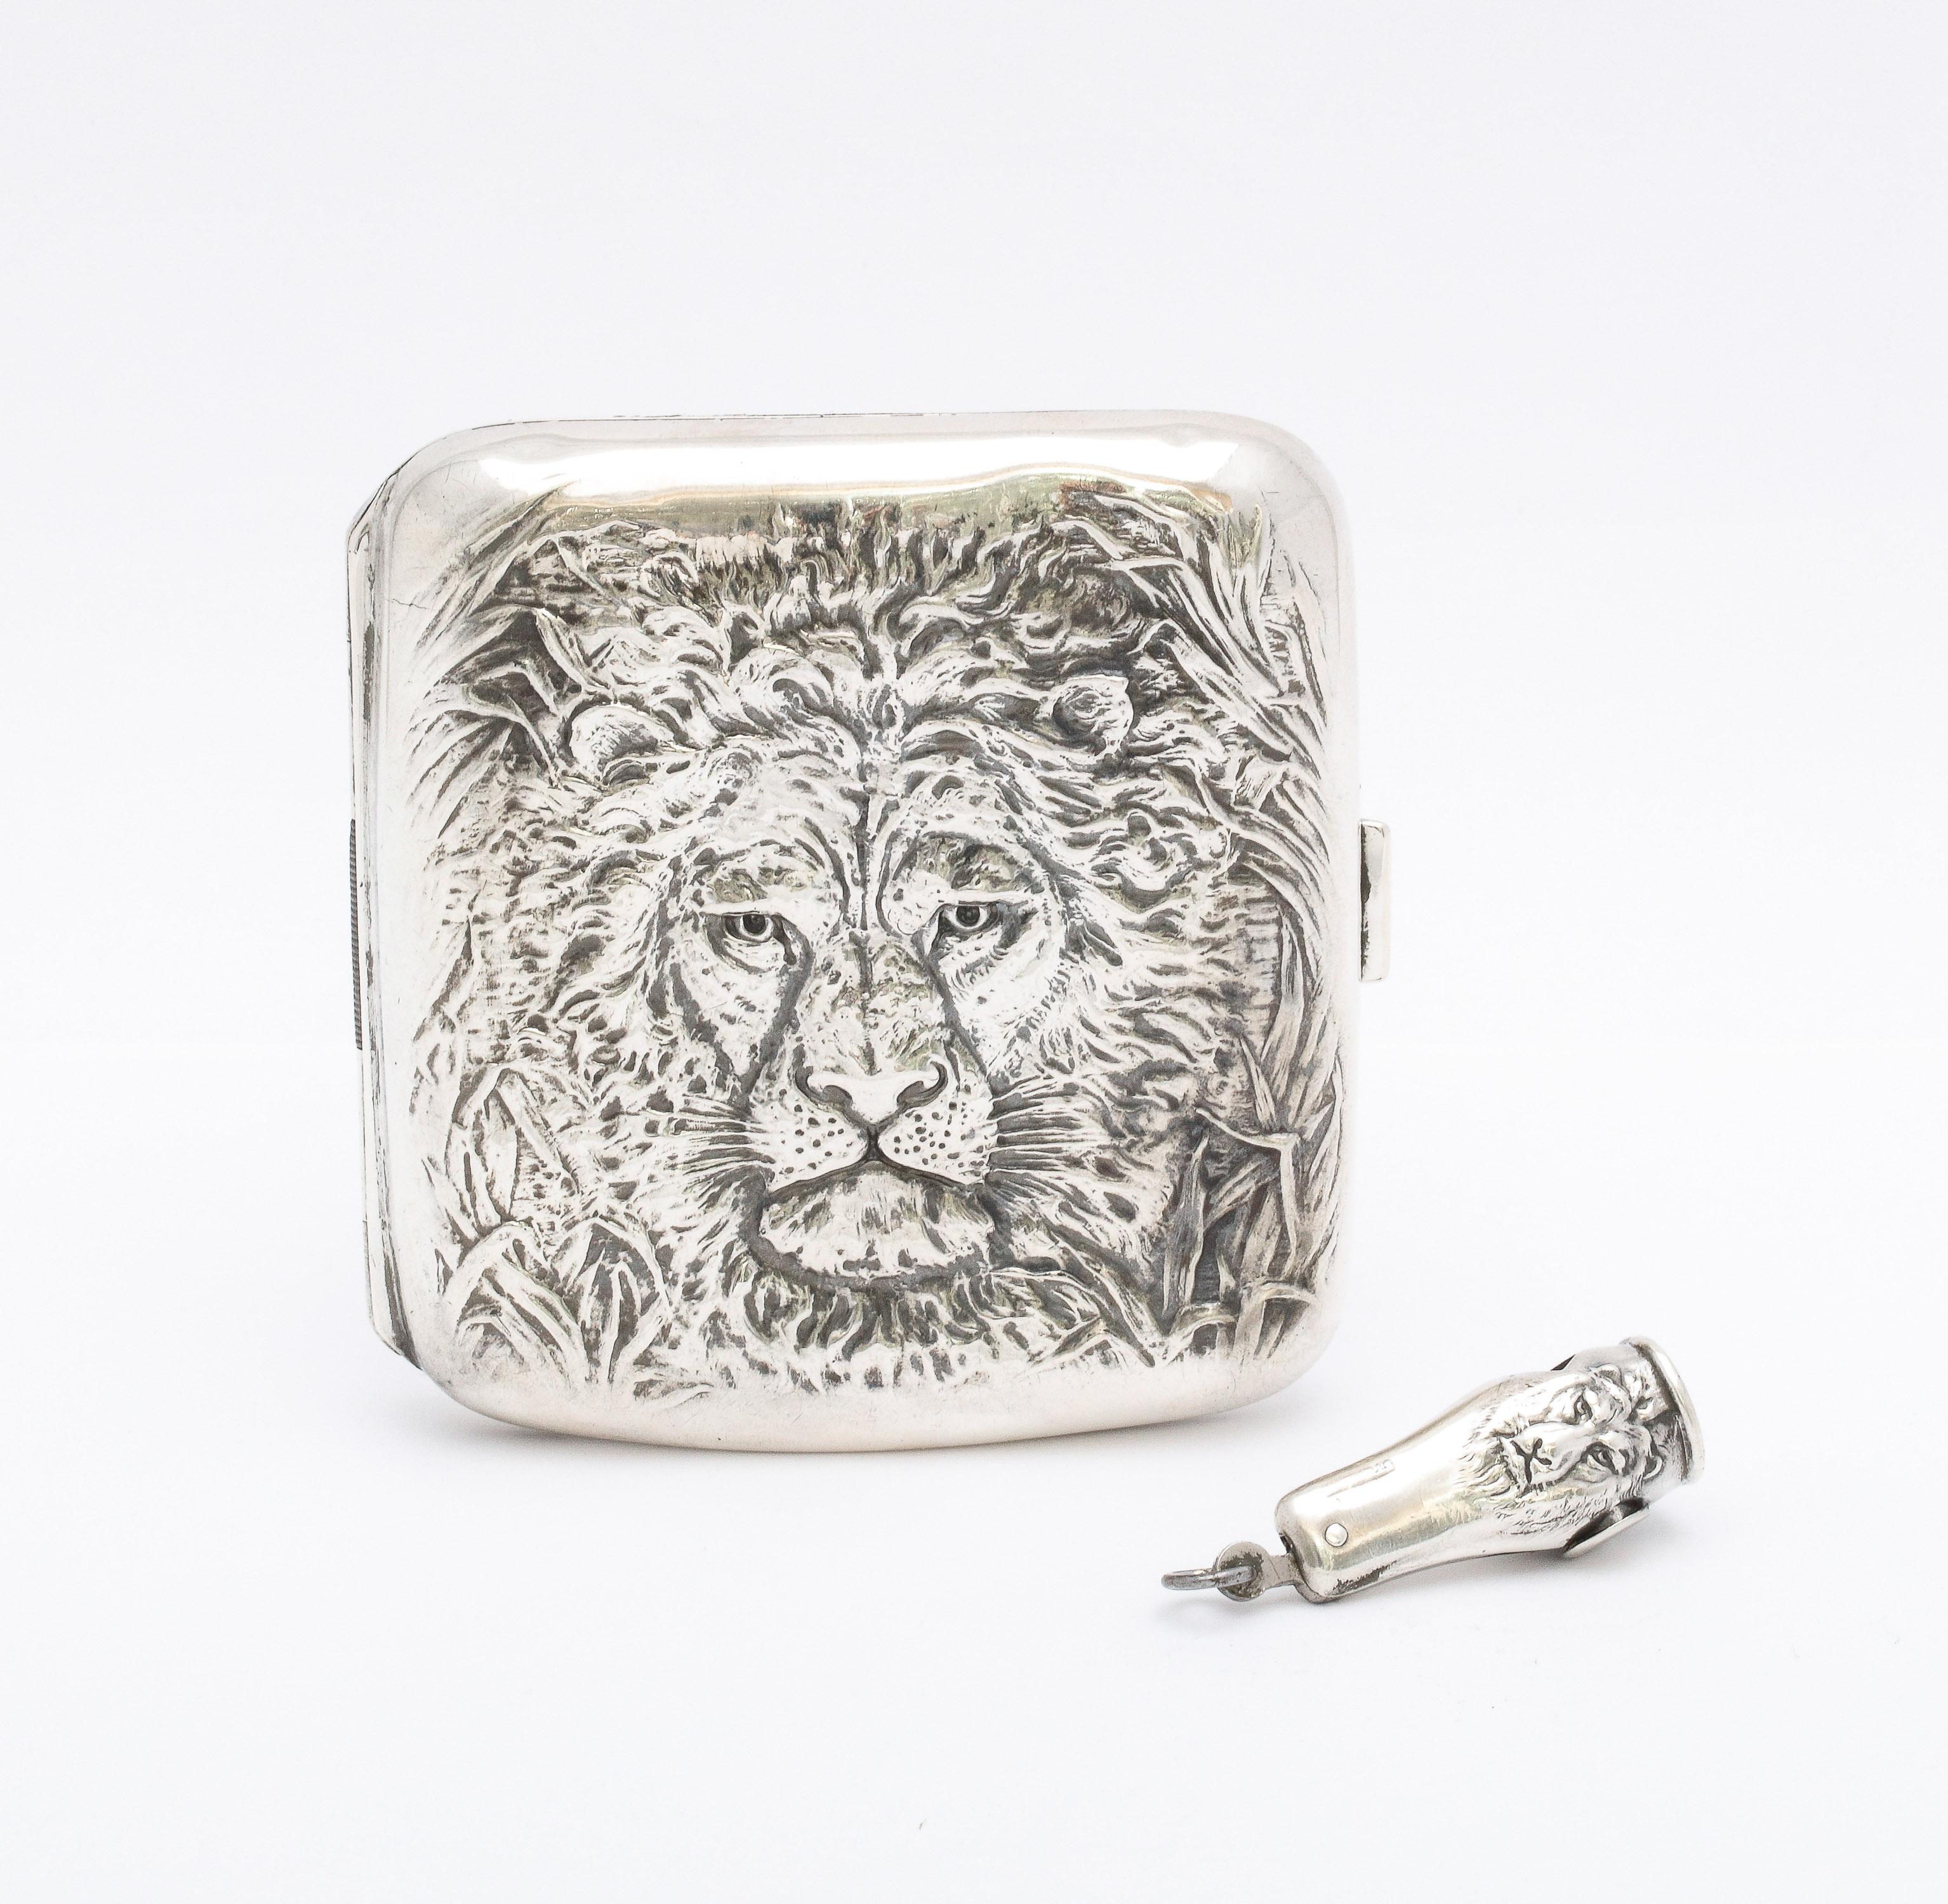 Fabulous, rare Art Nouveau Period, sterling silver lion's head motif cigarette case and matching working cutter, American, Ca. 1910. Both the cigarette case and matching cutter are designed with a full lion's head and mane. Inside of cigarette case